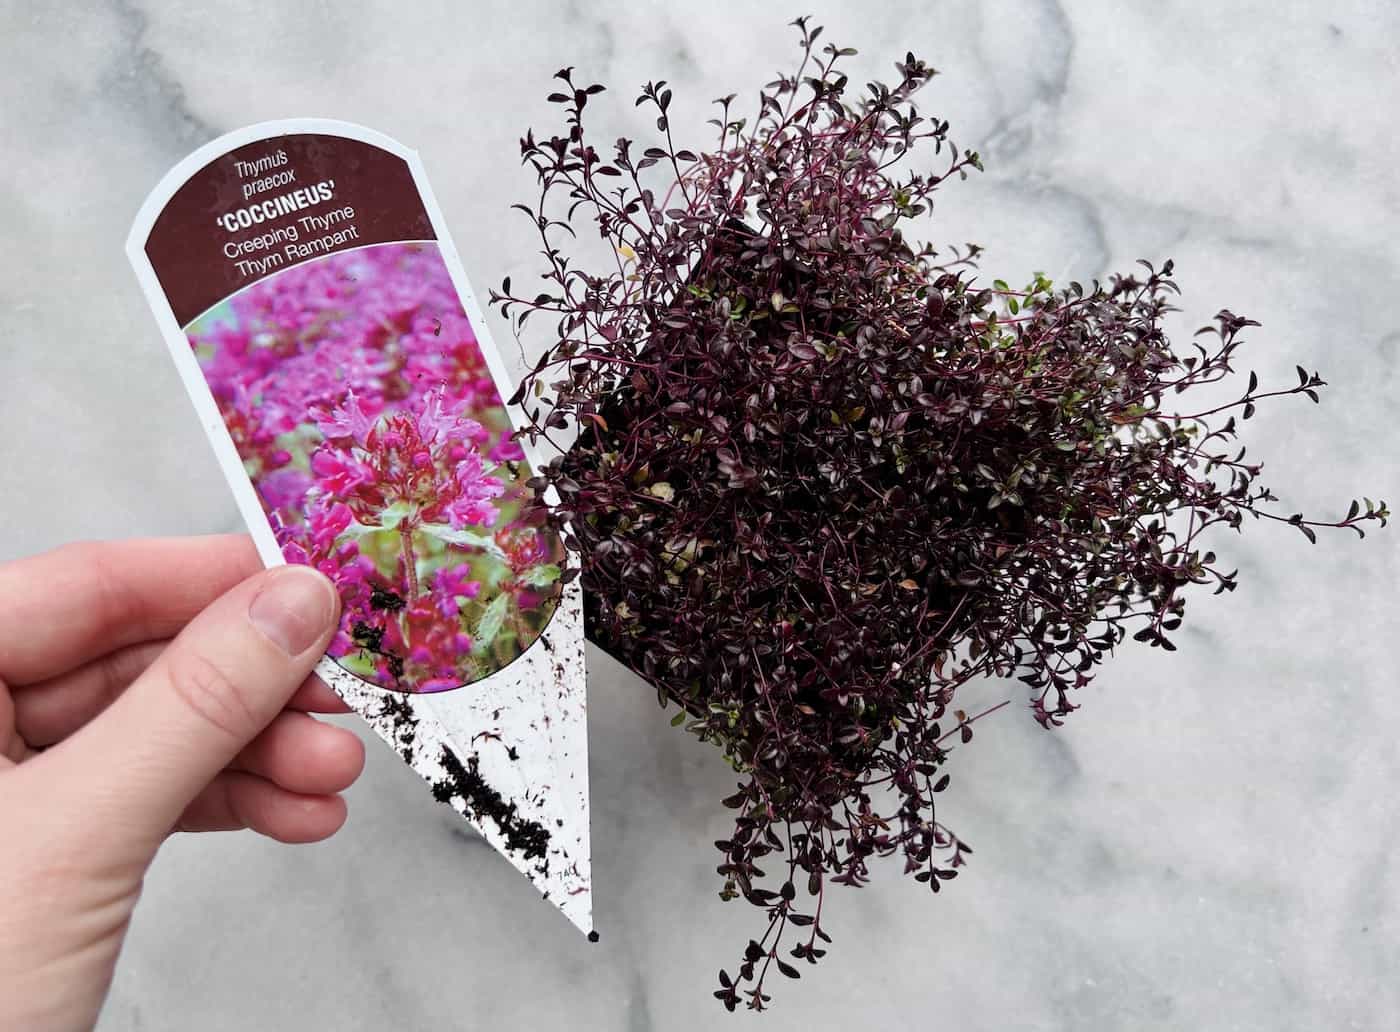 Tag for red creeping thyme - thymus praecox coccineus